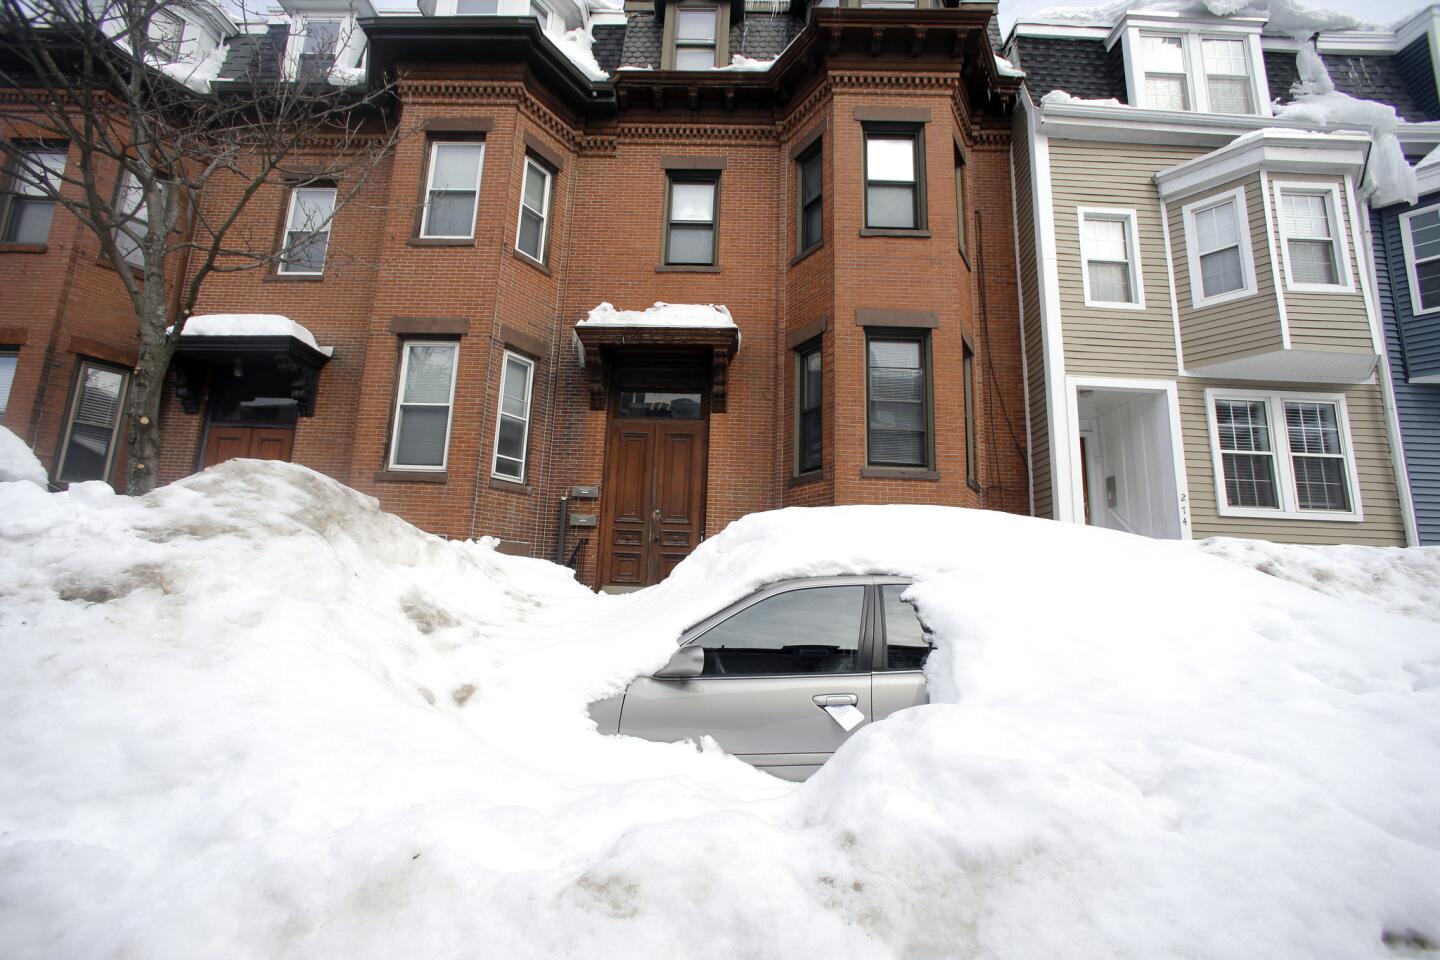 A car is buried in snow on a residential street in South Boston on Feb. 23.